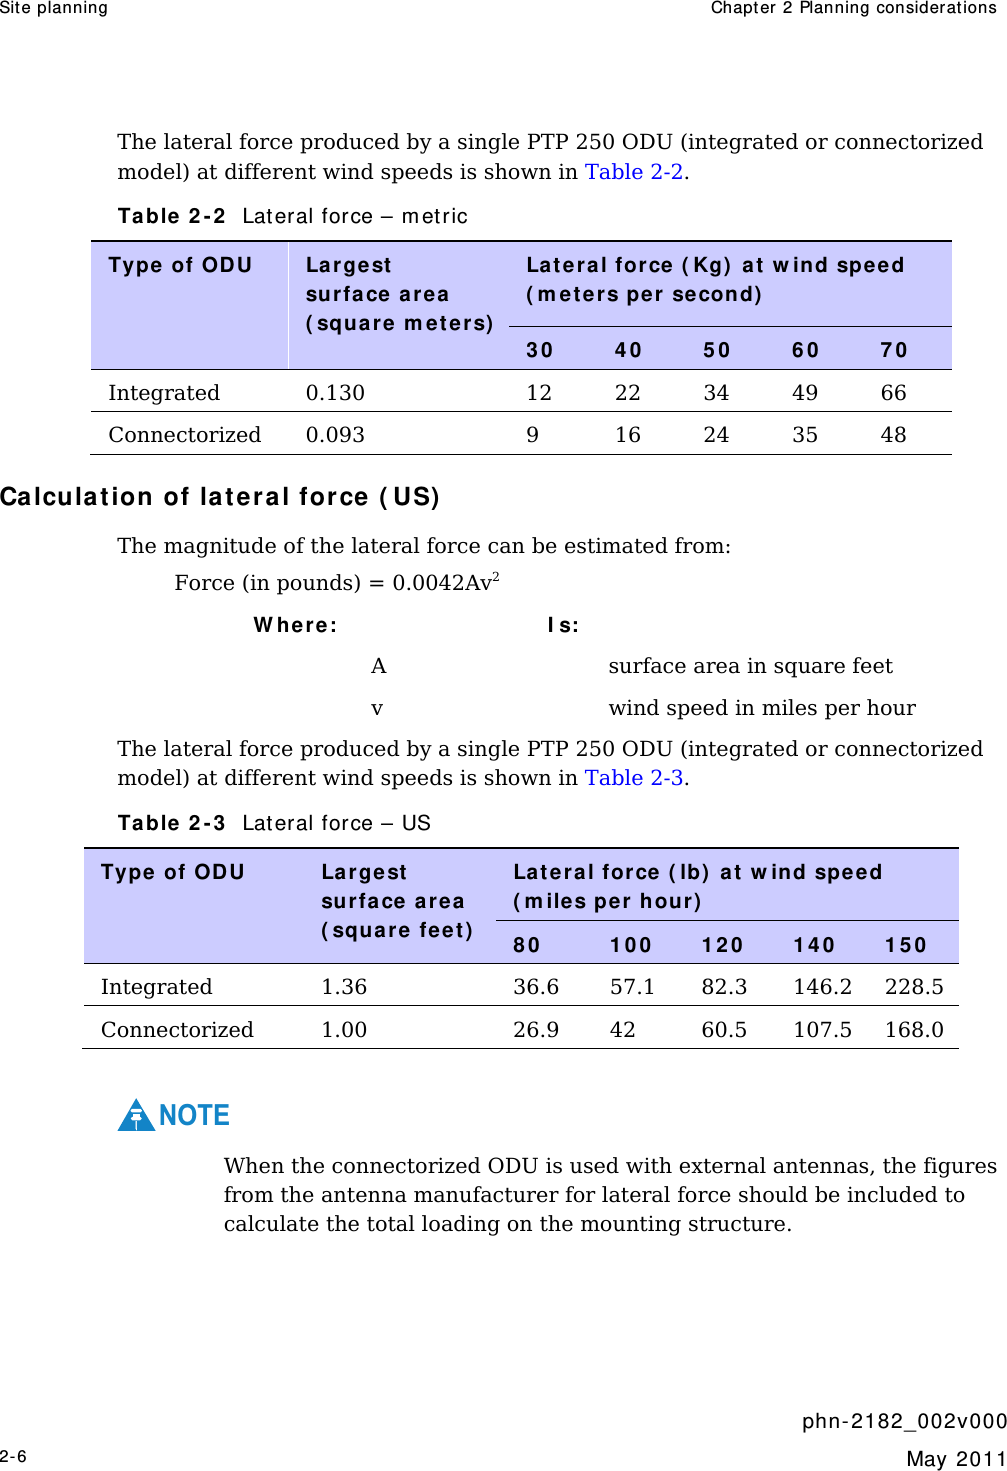 Site planning  Chapt er  2 Planning considerat ions     phn- 2 182_002v 000 2-6  May 2011  The lateral force produced by a single PTP 250 ODU (integrated or connectorized model) at different wind speeds is shown in Table 2-2. Table  2 - 2   Lateral force – m et ric Type  of ODU  La rge st   sur fa ce  area ( square m et e rs) Lat e ra l force  ( Kg)  at  w ind spee d ( m e te rs per  se cond)  3 0   4 0   5 0   6 0   7 0  Integrated  0.130  12 22 34 49 66 Connectorized 0.093  9  16 24 35 48 Calculat ion of la t e r al for ce  ( US)  The magnitude of the lateral force can be estimated from: Force (in pounds) = 0.0042Av2 W he re :   I s:   A   surface area in square feet  v   wind speed in miles per hour The lateral force produced by a single PTP 250 ODU (integrated or connectorized model) at different wind speeds is shown in Table 2-3. Table  2 - 3   Lateral force – US Type  of ODU  Largest sur fa ce  area ( squar e feet )  Lat e ra l force  ( lb)  at  w ind spee d ( m iles per hour)  8 0   1 0 0   1 2 0   1 4 0   1 5 0  Integrated  1.36  36.6   57.1   82.3   146.2   228.5  Connectorized  1.00  26.9   42   60.5   107.5   168.0   NOTE When the connectorized ODU is used with external antennas, the figures from the antenna manufacturer for lateral force should be included to calculate the total loading on the mounting structure. 